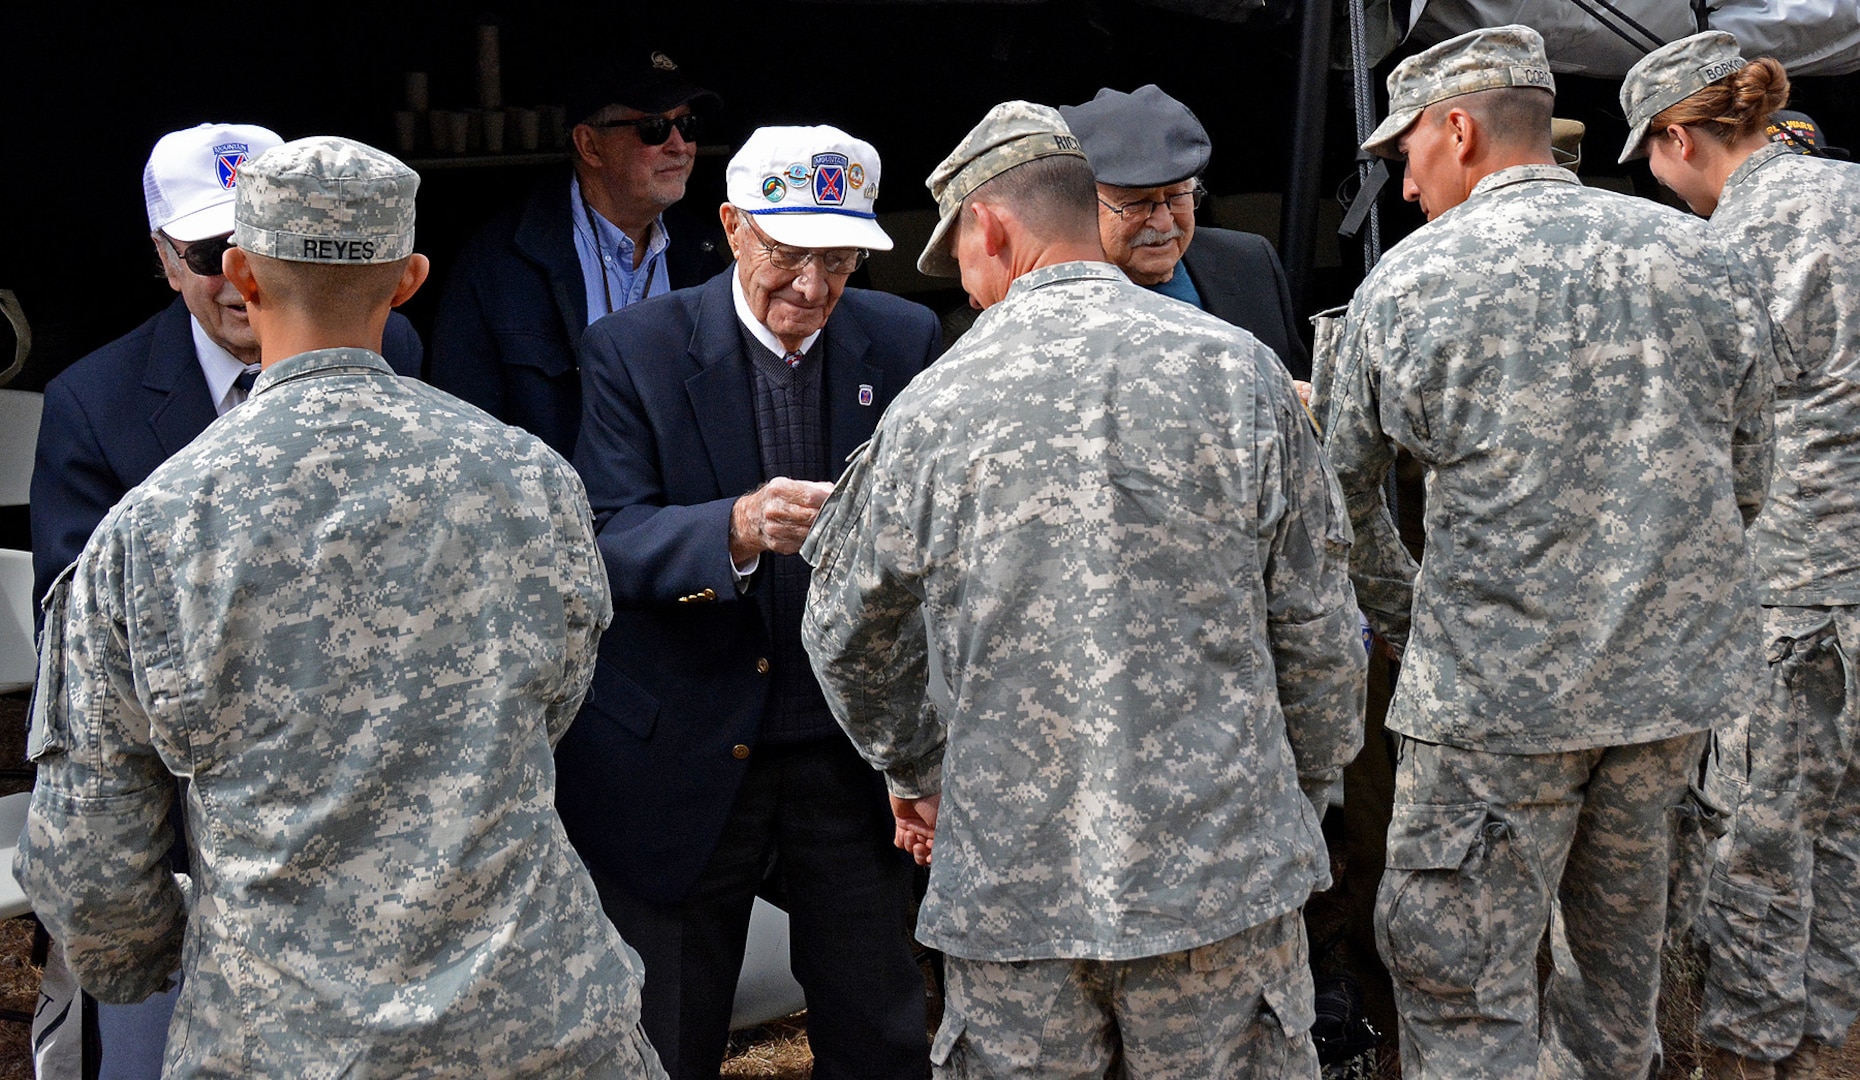 Several 10th Mountain Division World War II veterans “patched”  Soldiers of 1st Battalion, 157th Infantry (Mountain), Colorado Army National Guard, during the historic re-patching ceremony at Camp Hale, Colorado Oct. 30, 2016, as the 1-157 IN (MTN) became part of the 10th Mountain Division. The 1-157th assumes its role as one of only three mountain infantry battalions in the U.S. Army, reconnecting the historic 10th Mountain Division to Colorado. (Photo by Army National Guard Staff Sgt. Lalita Laksbergs)